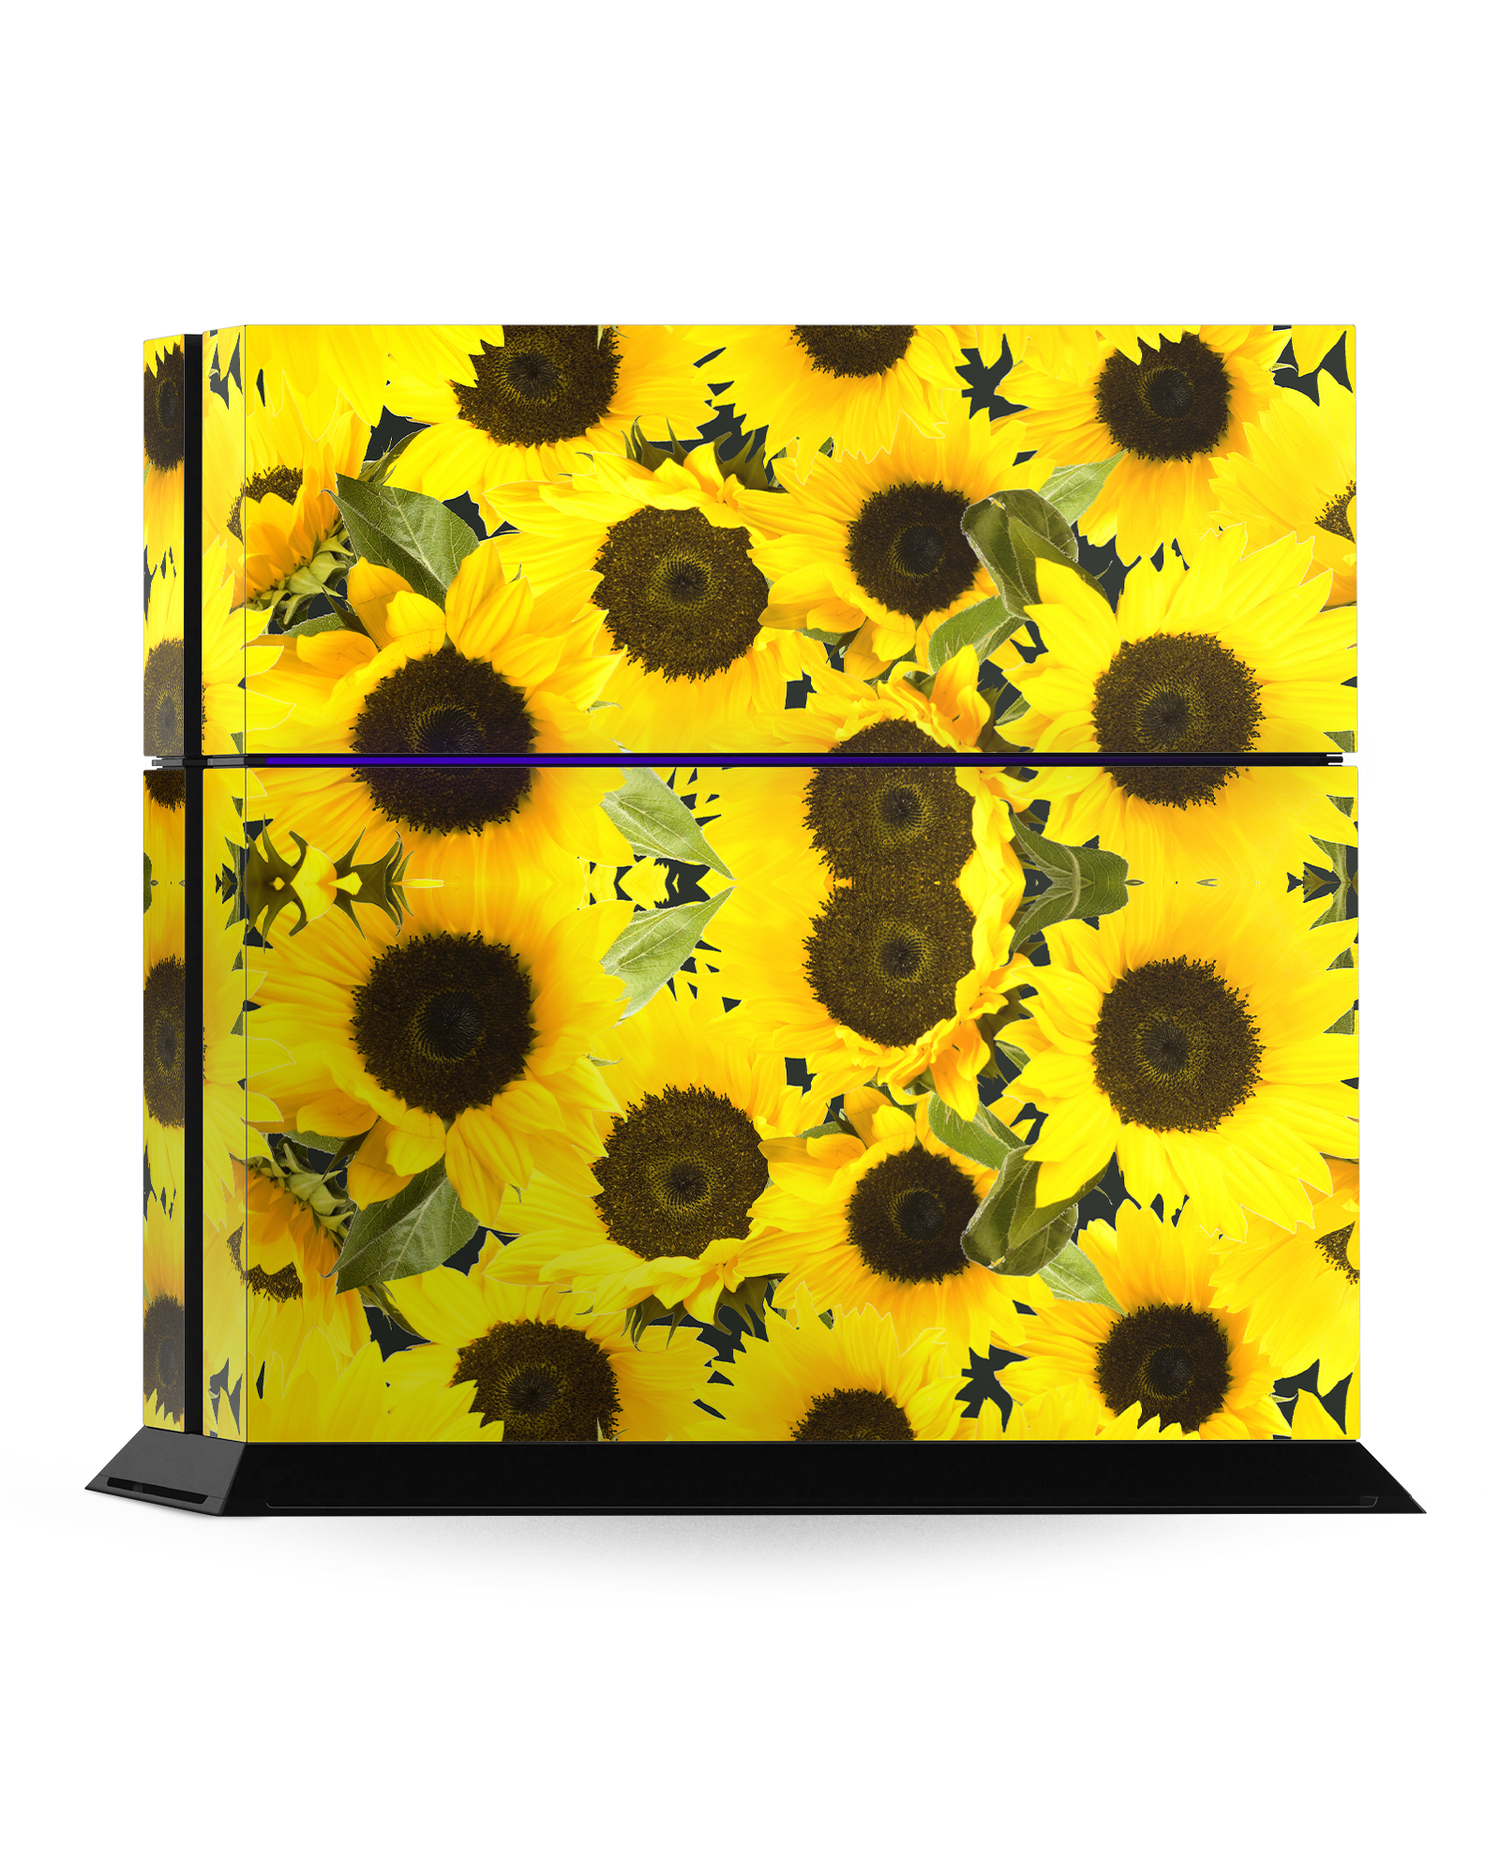 Sunflowers Console Skin for Sony PlayStation 4: Standing